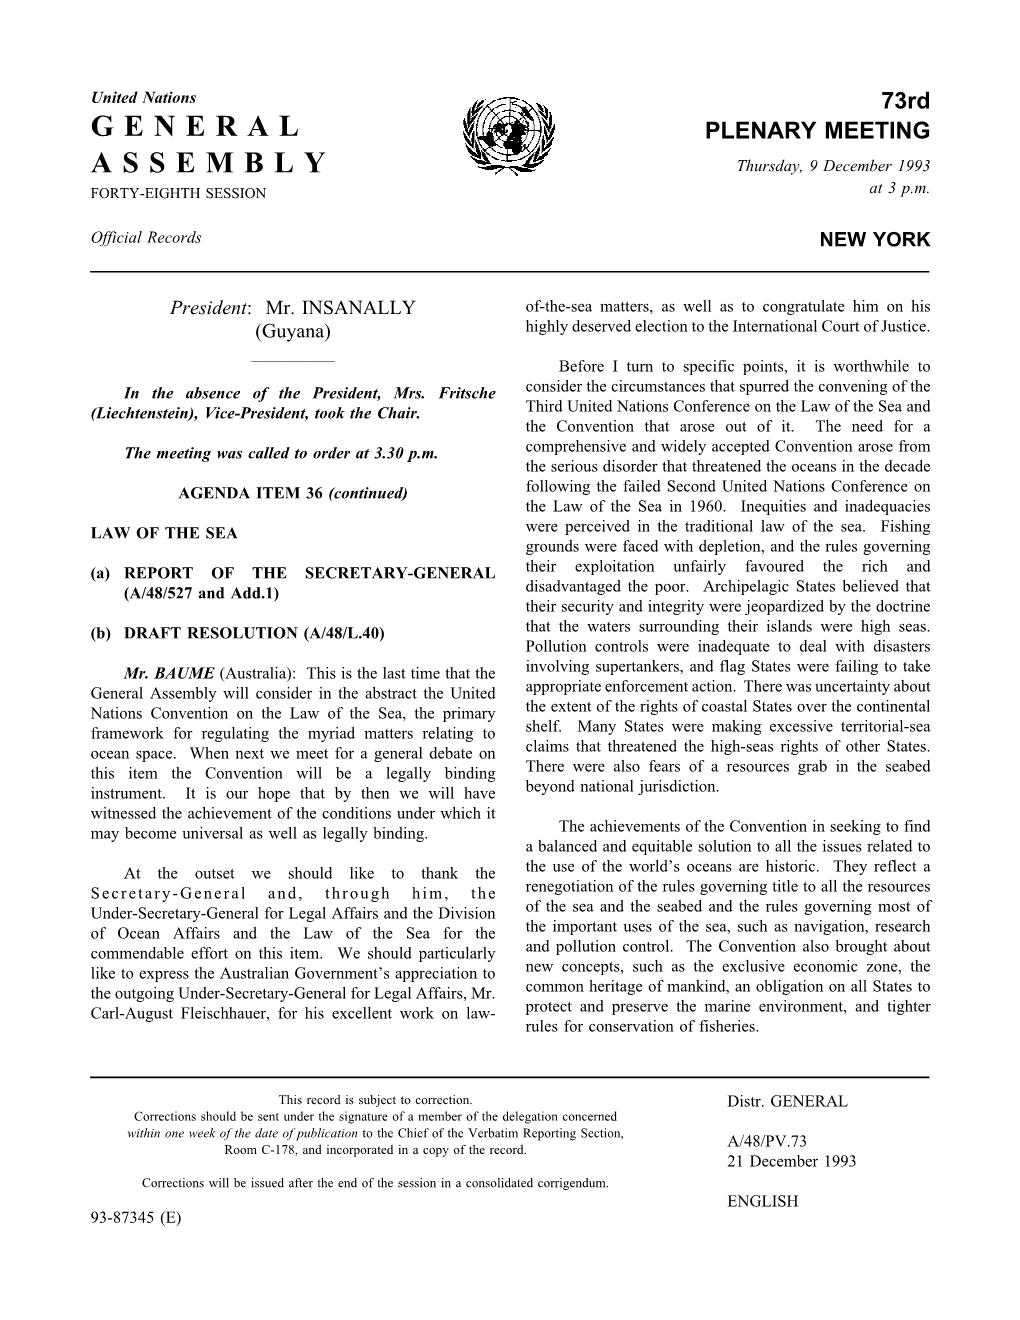 General Assembly Will Consider in the Abstract the United Appropriate Enforcement Action